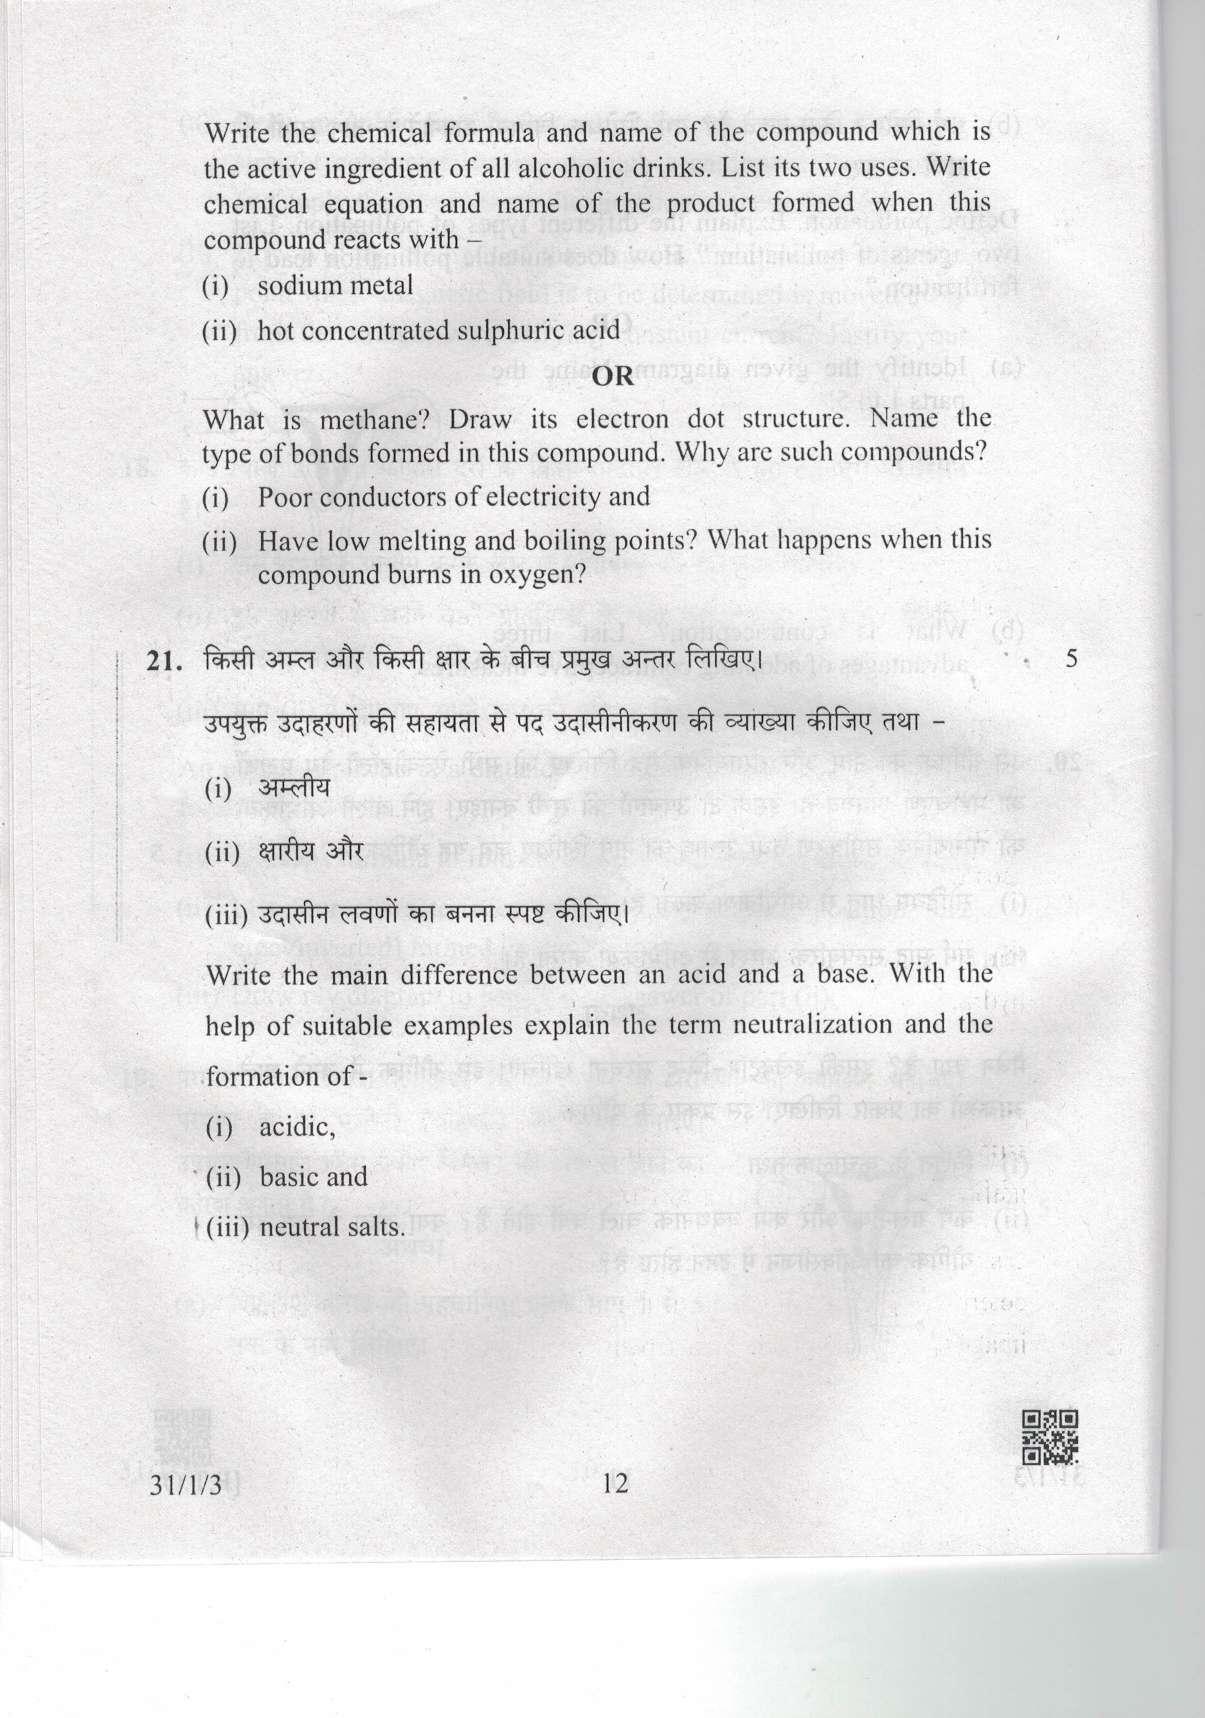 CBSE Class 10 31-1-3 Science 2019 Question Paper - Page 12